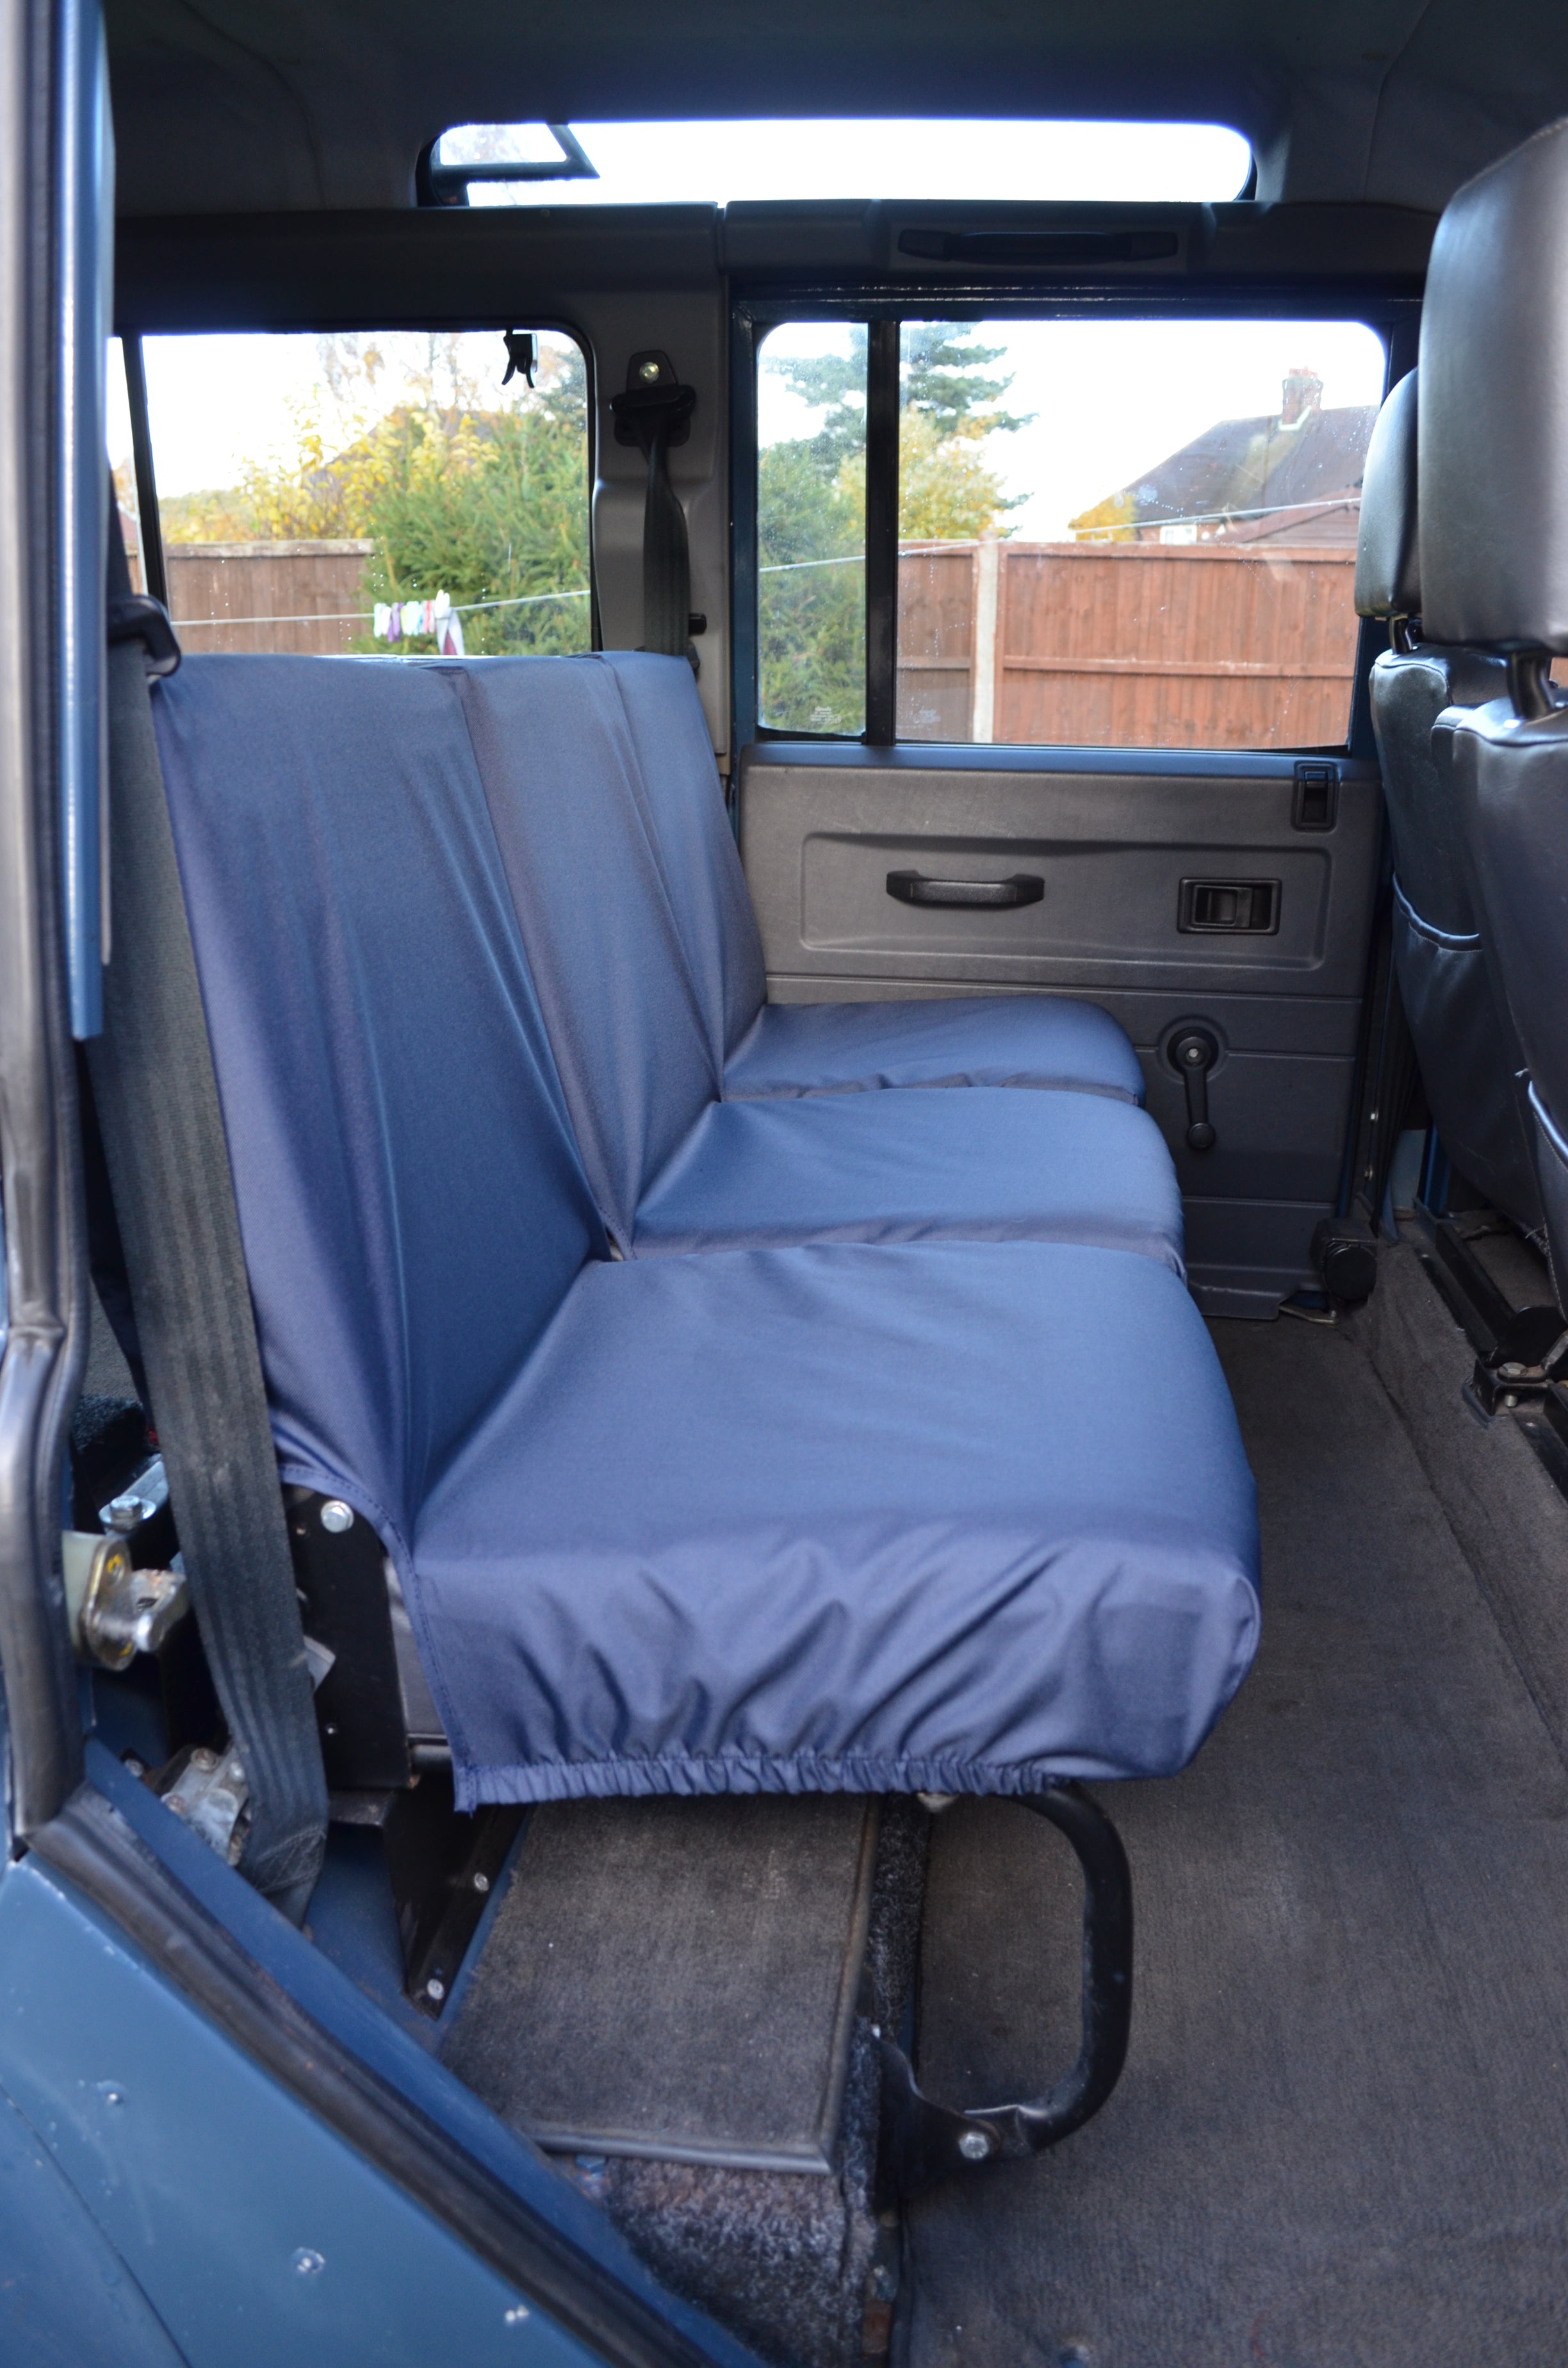 Land Rover Defender 1983 - 2007 Rear Seat Covers 2nd Row 3 Singles / Navy Blue Turtle Covers Ltd